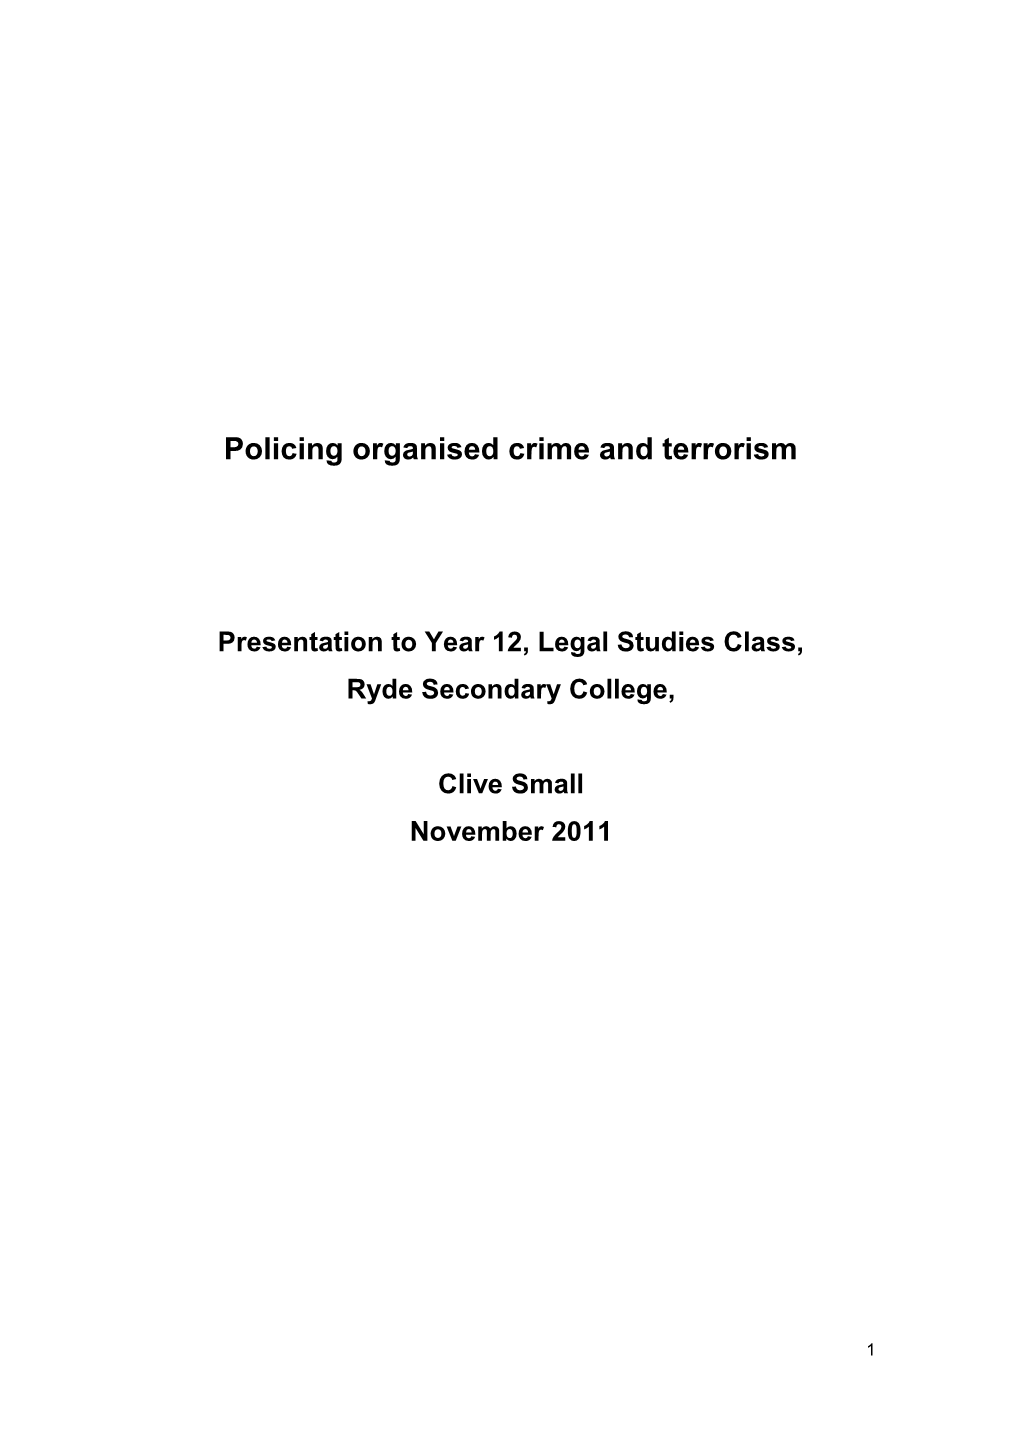 Policing Organised Crime and Terrorism